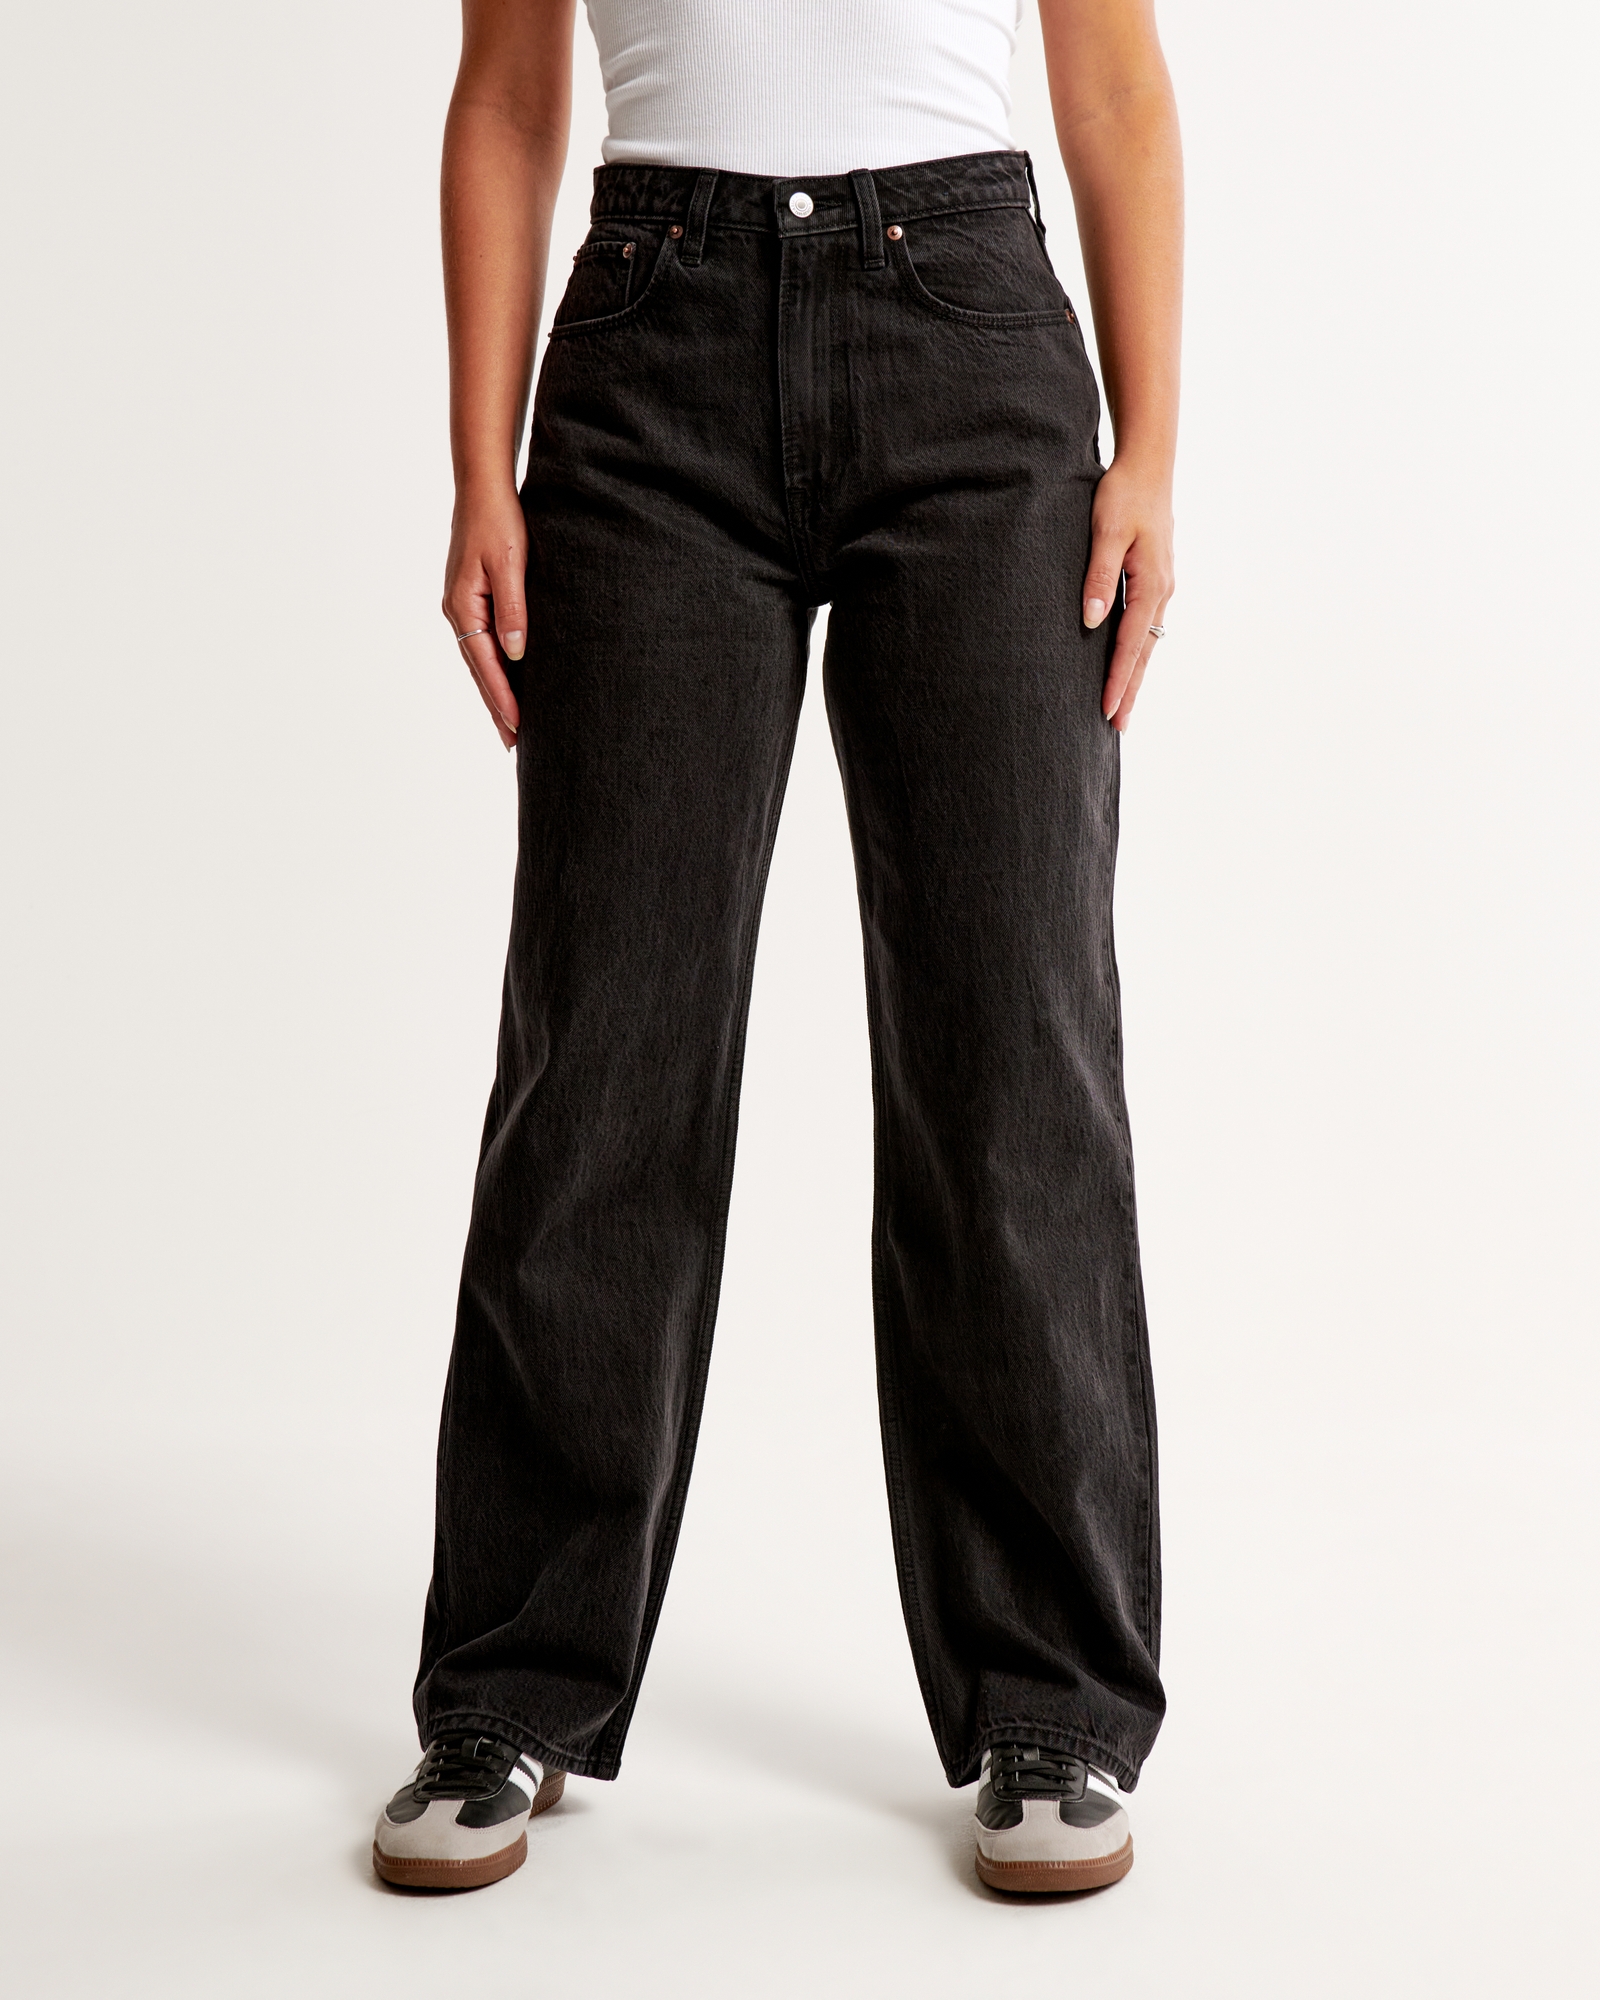 Abercrombie & Fitch High Rise Curve Love Flare Jeans Black Size 30 - $65  (35% Off Retail) New With Tags - From MJ